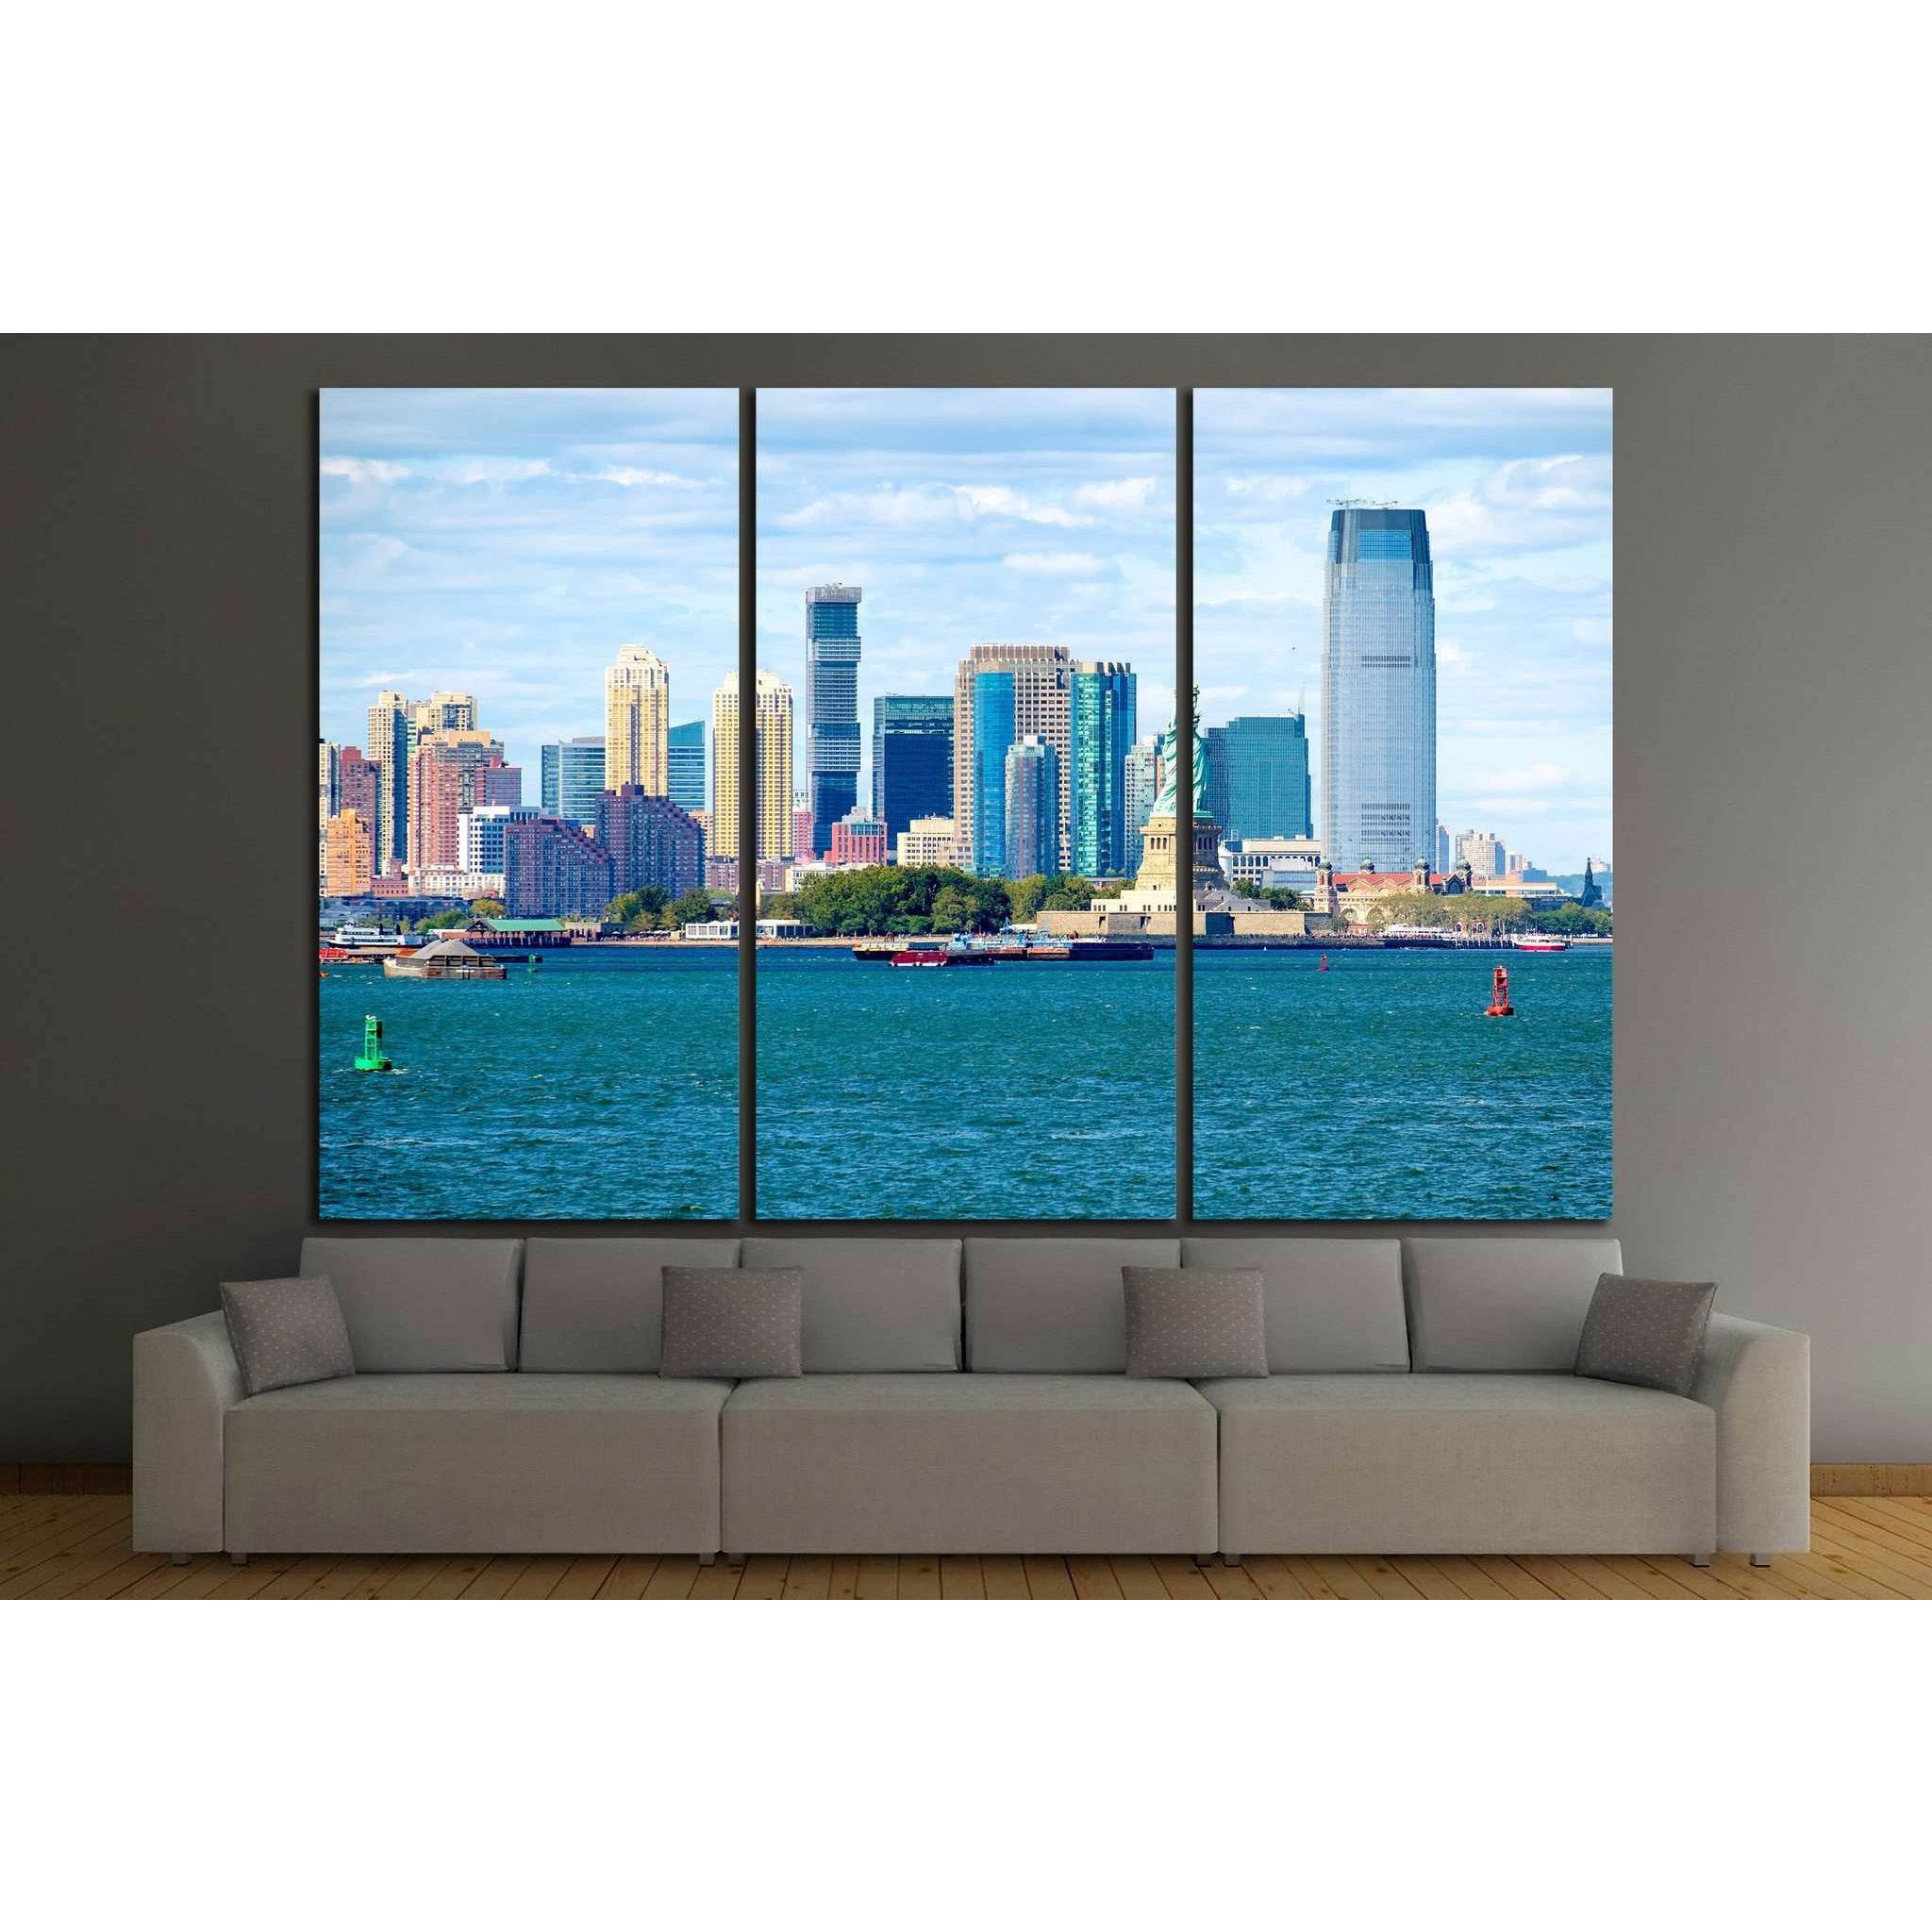 The Statue of Liberty in New York City №1256 Ready to Hang Canvas Print